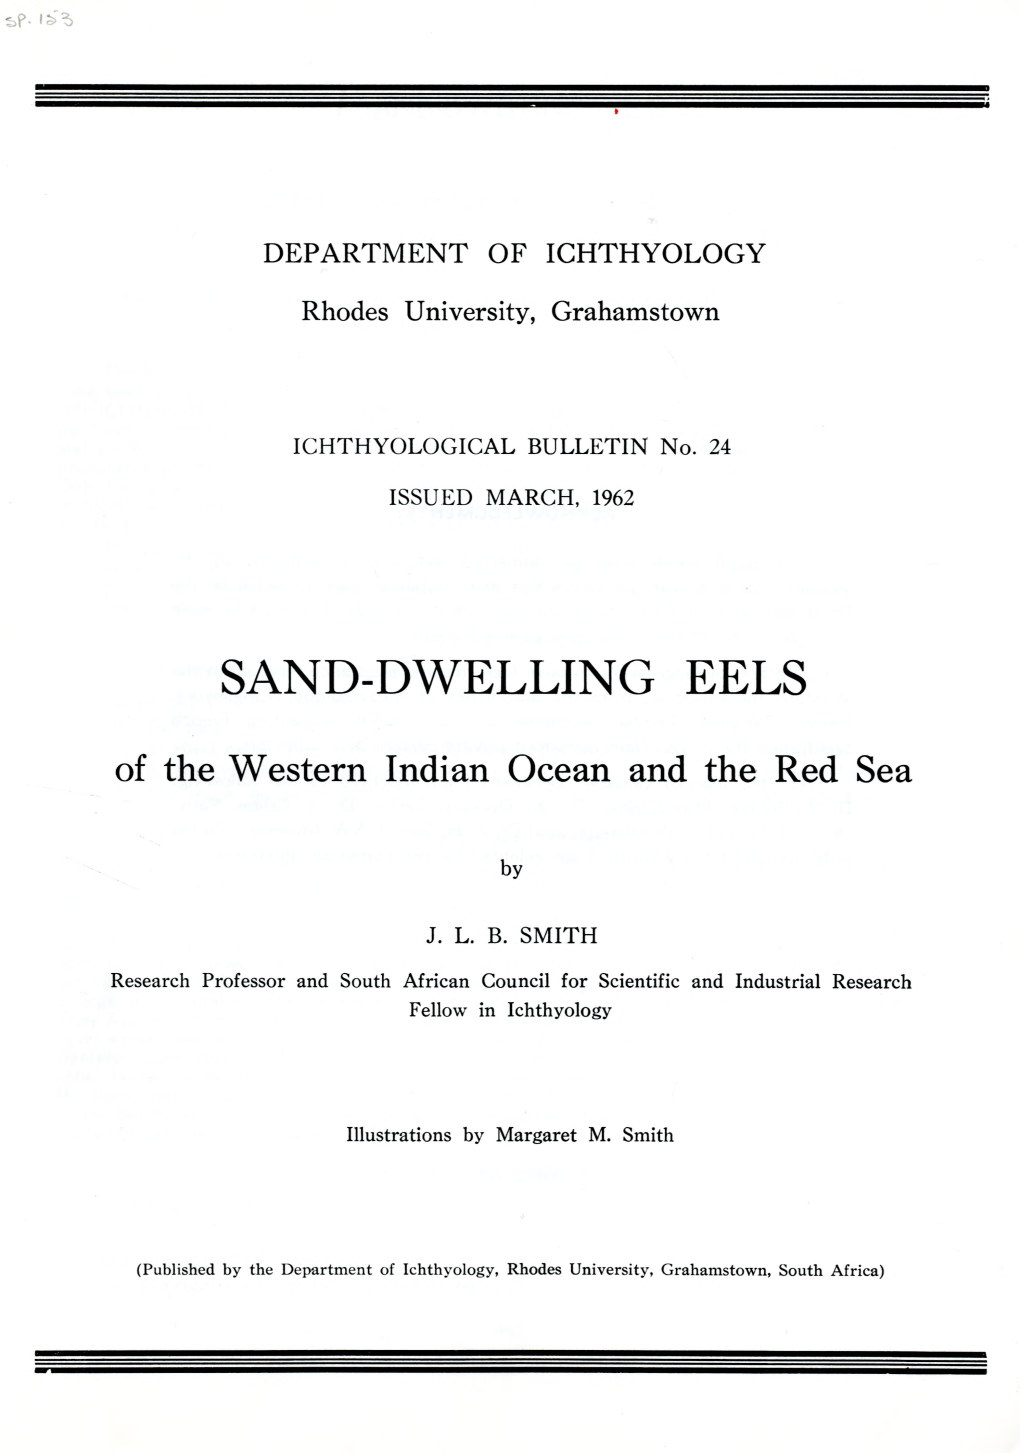 SAND-DWELLING EELS of the Western Indian Ocean and the Red Sea